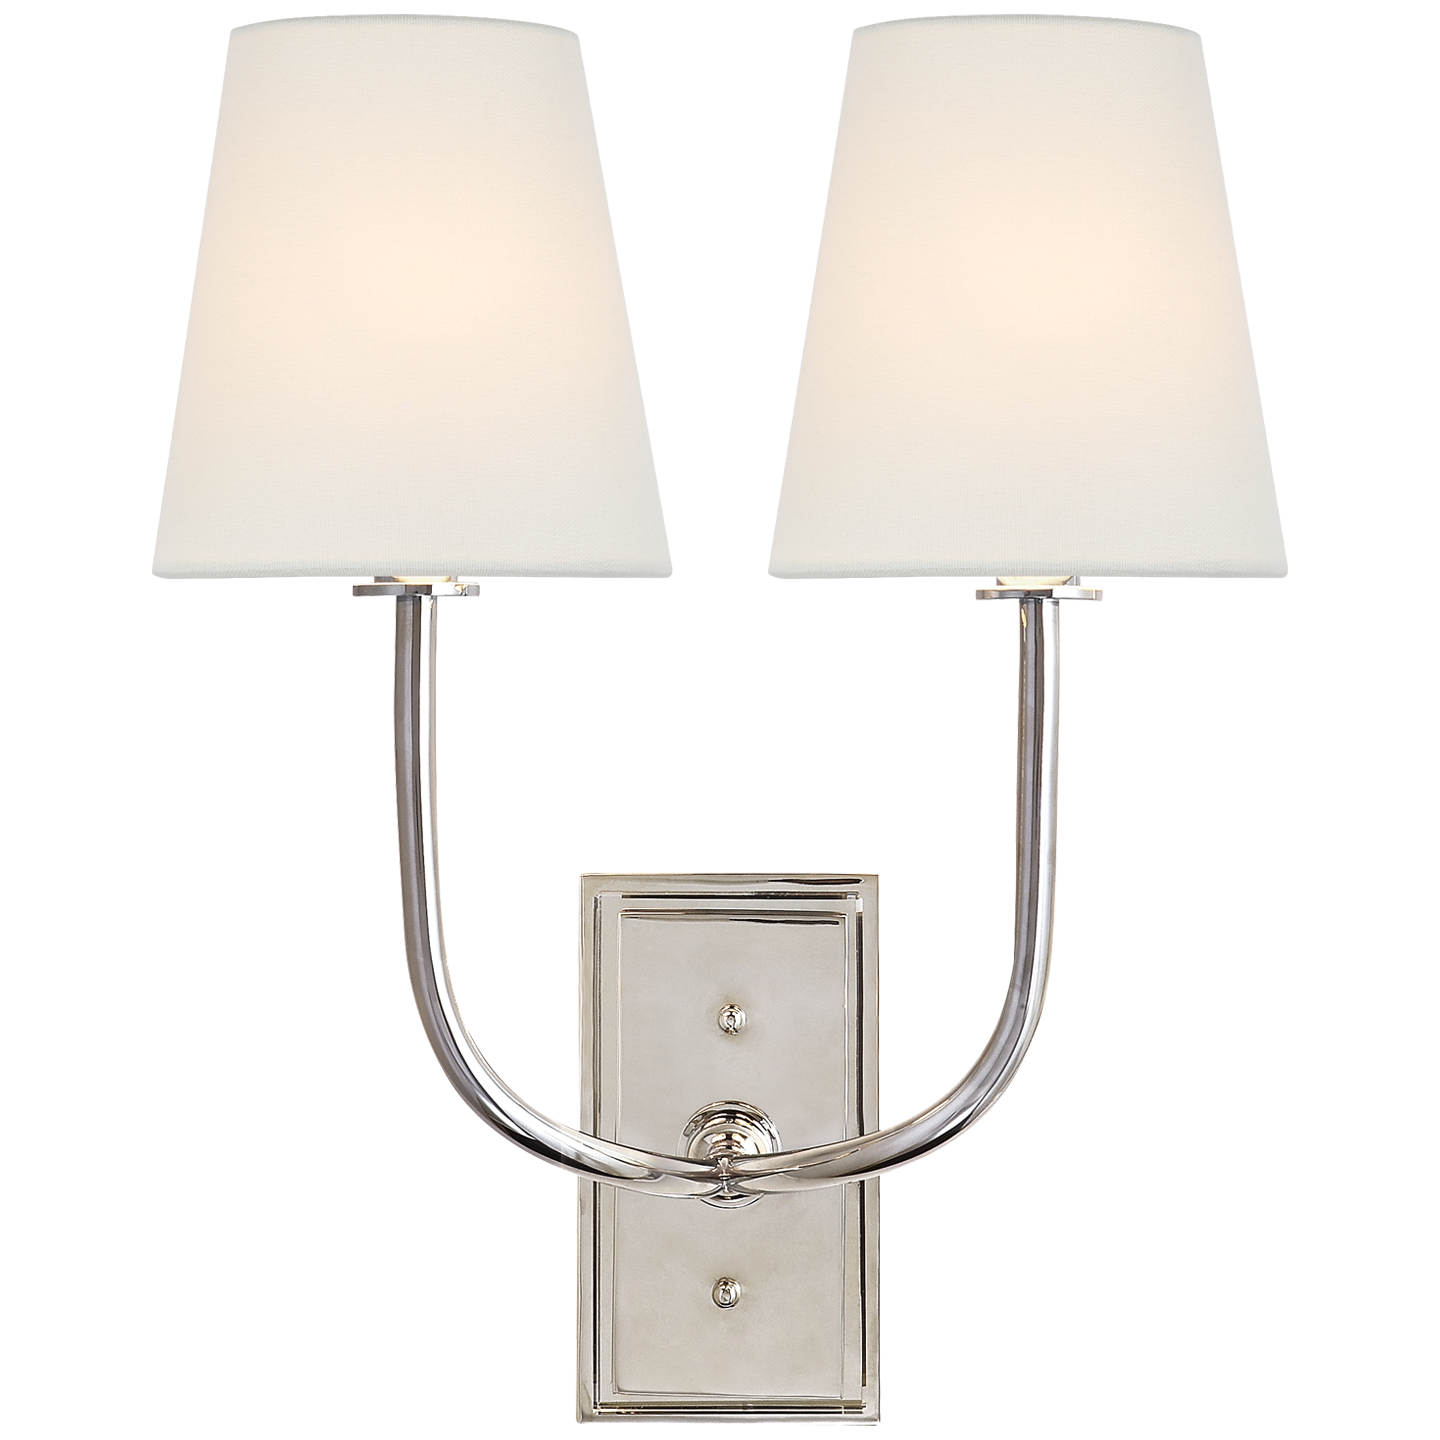 Visual Comfort Hulton Double Sconce